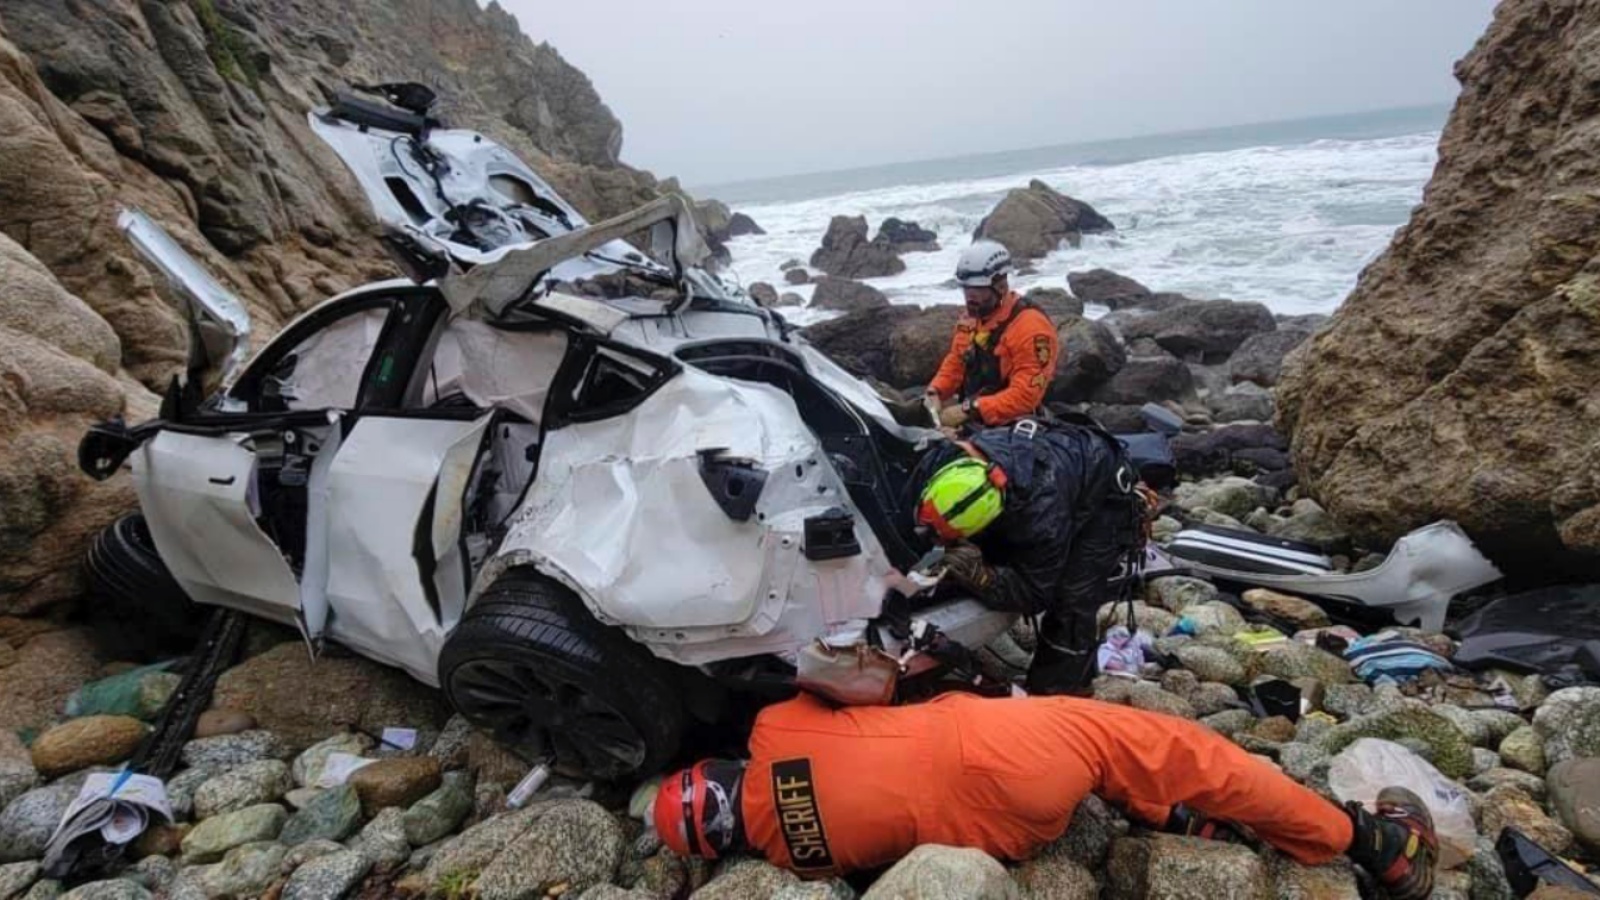 Psychologist: Indian-American Radiologist in Cliff Tragedy Had Psychotic Breakdown